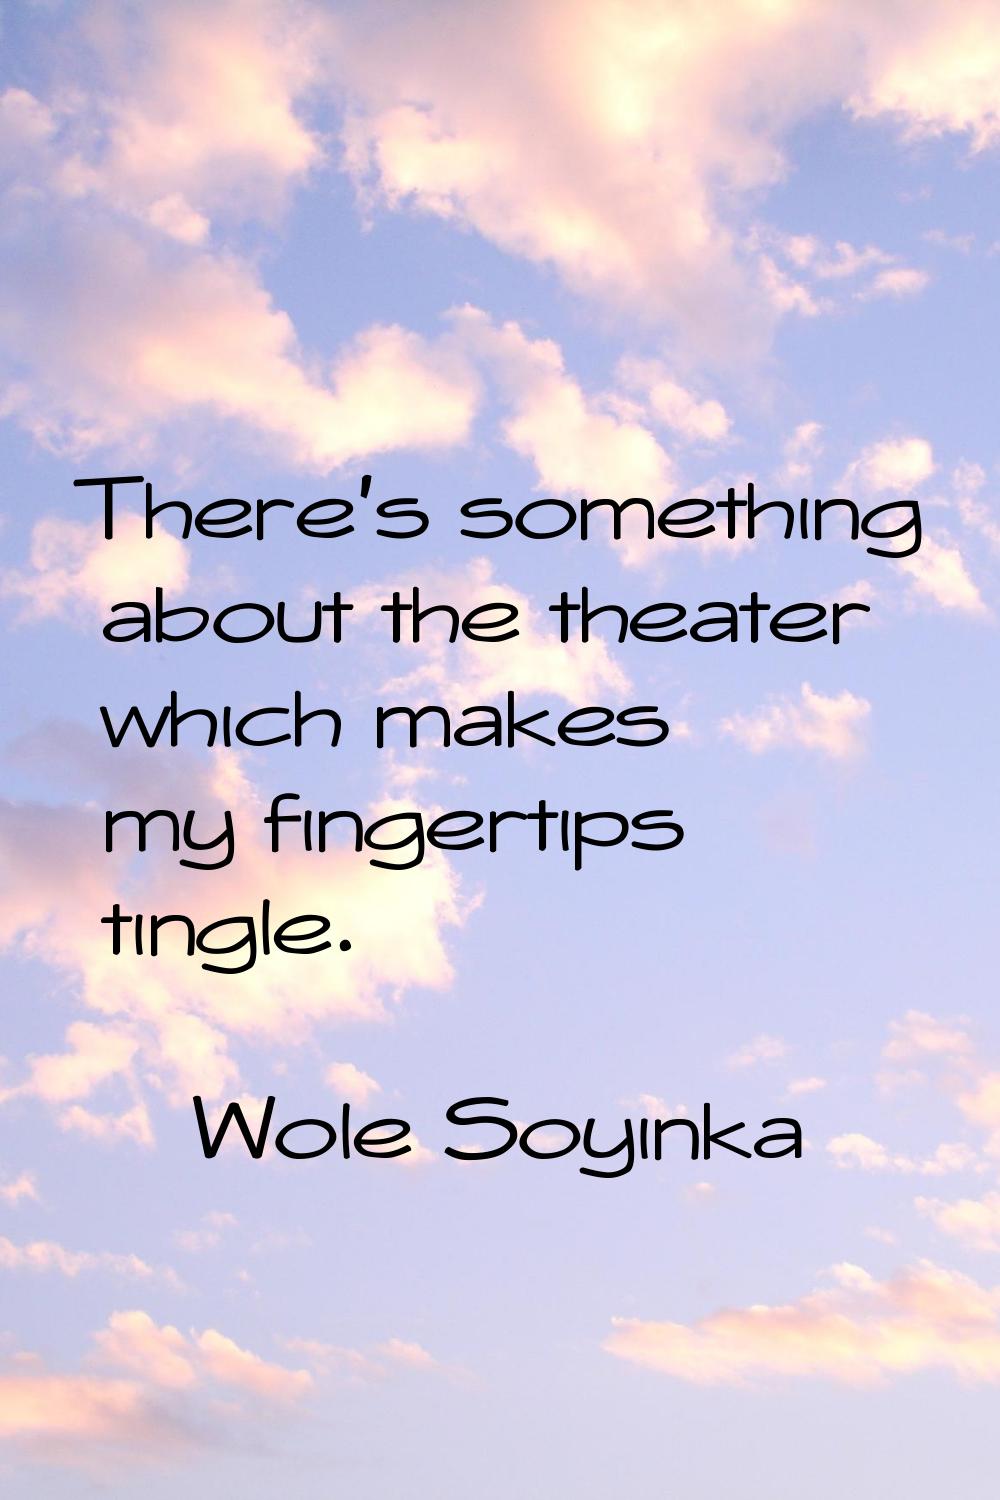 There's something about the theater which makes my fingertips tingle.